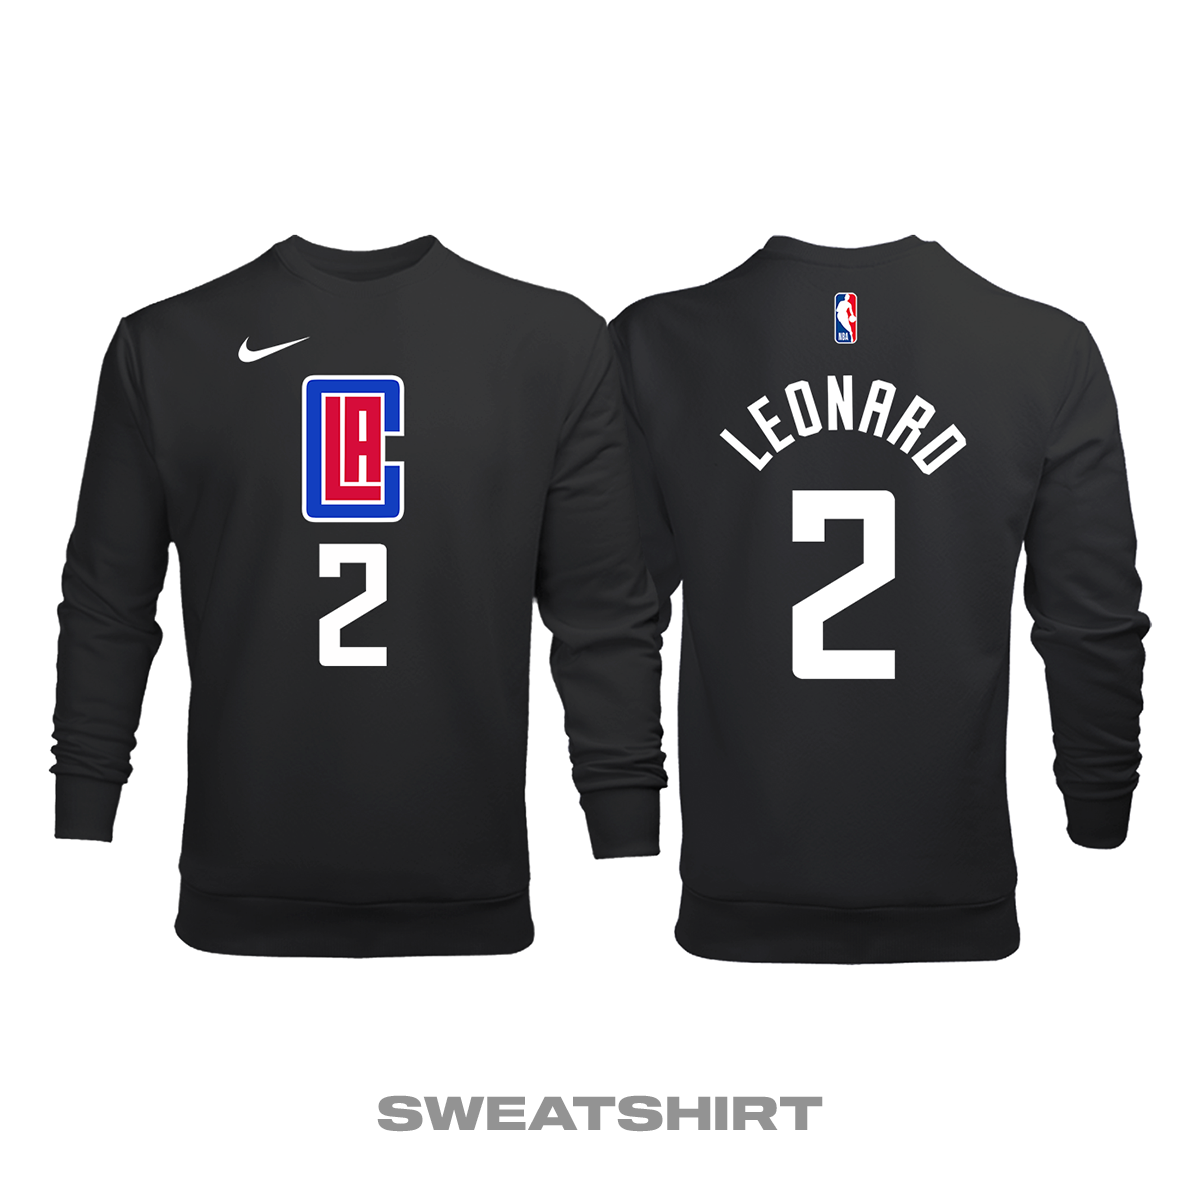 Los Angeles Clippers: Statement Edition 2017/2018 Sweatshirt